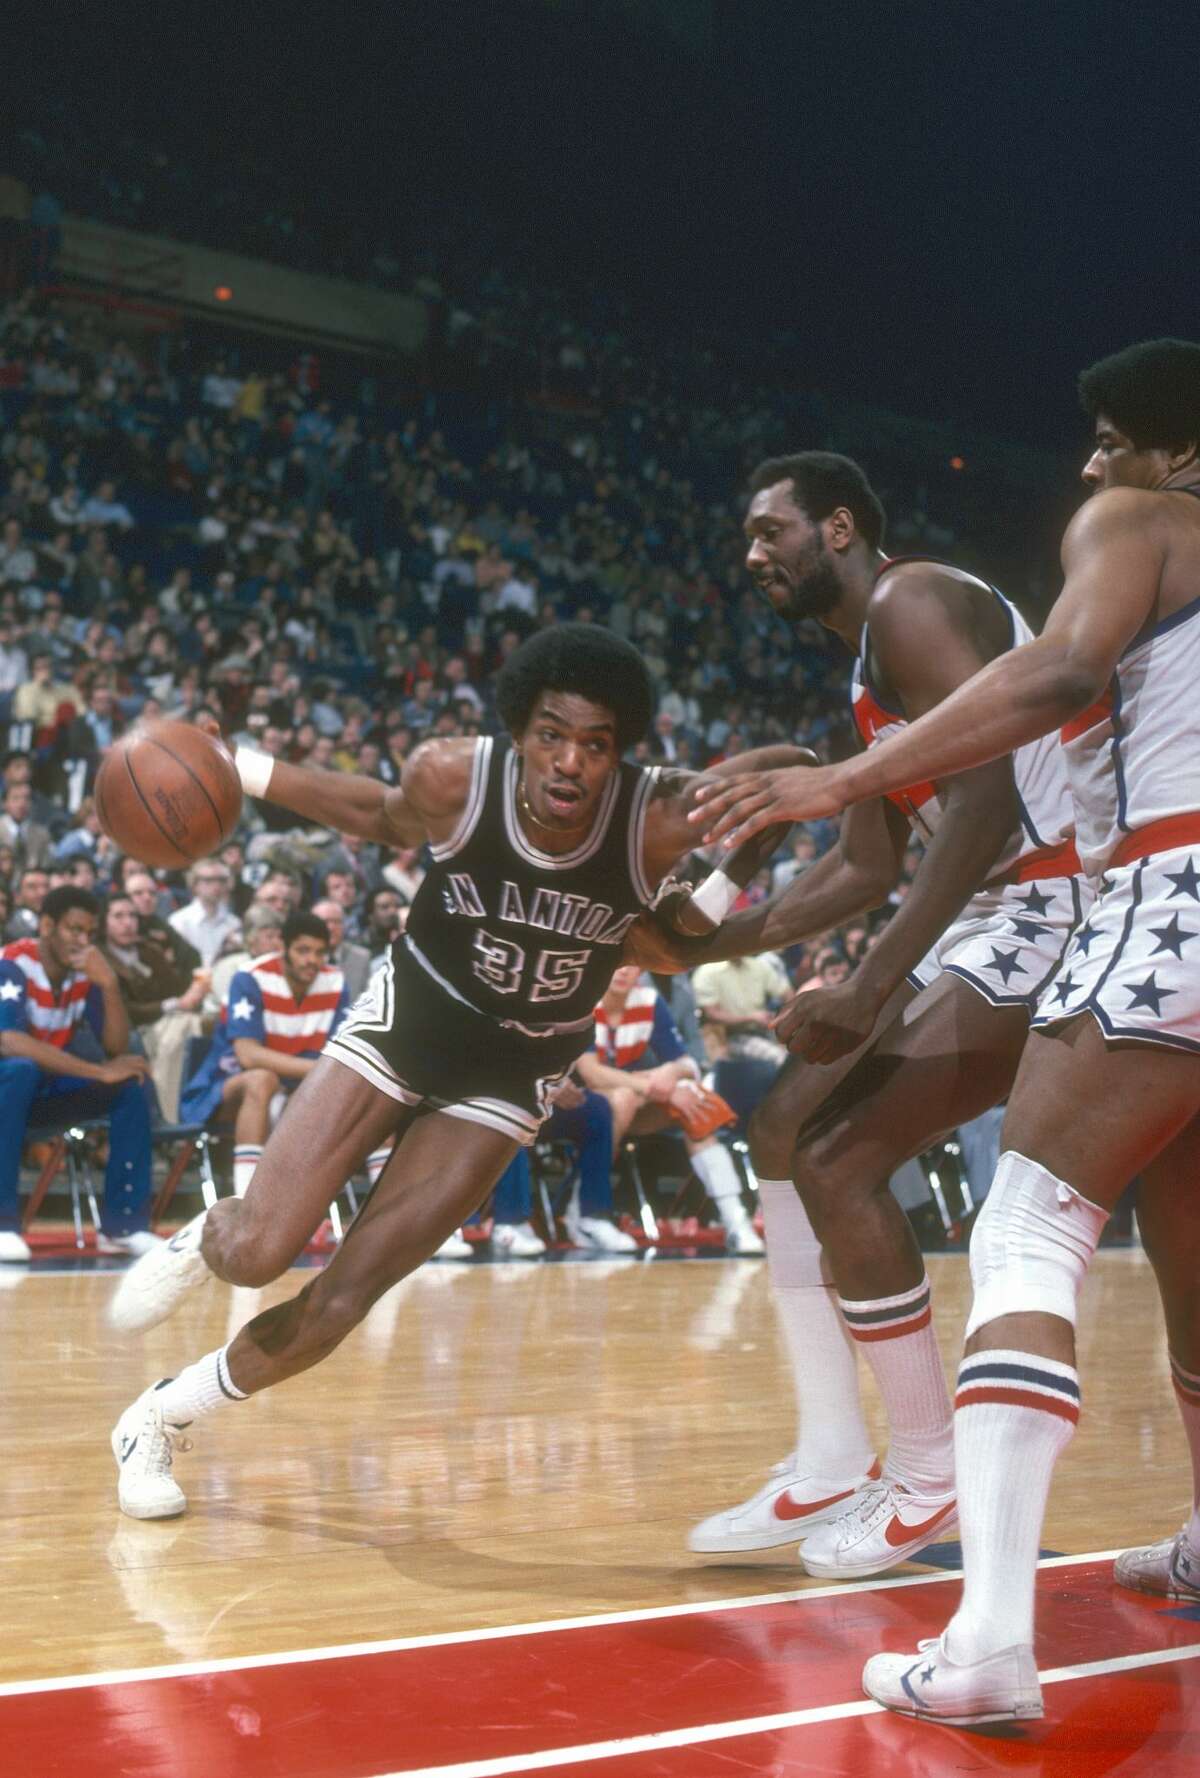 Date: June 3, 1975 Deal: Spurs trade Swen Nater to the New York Nets for Larry Kenon.